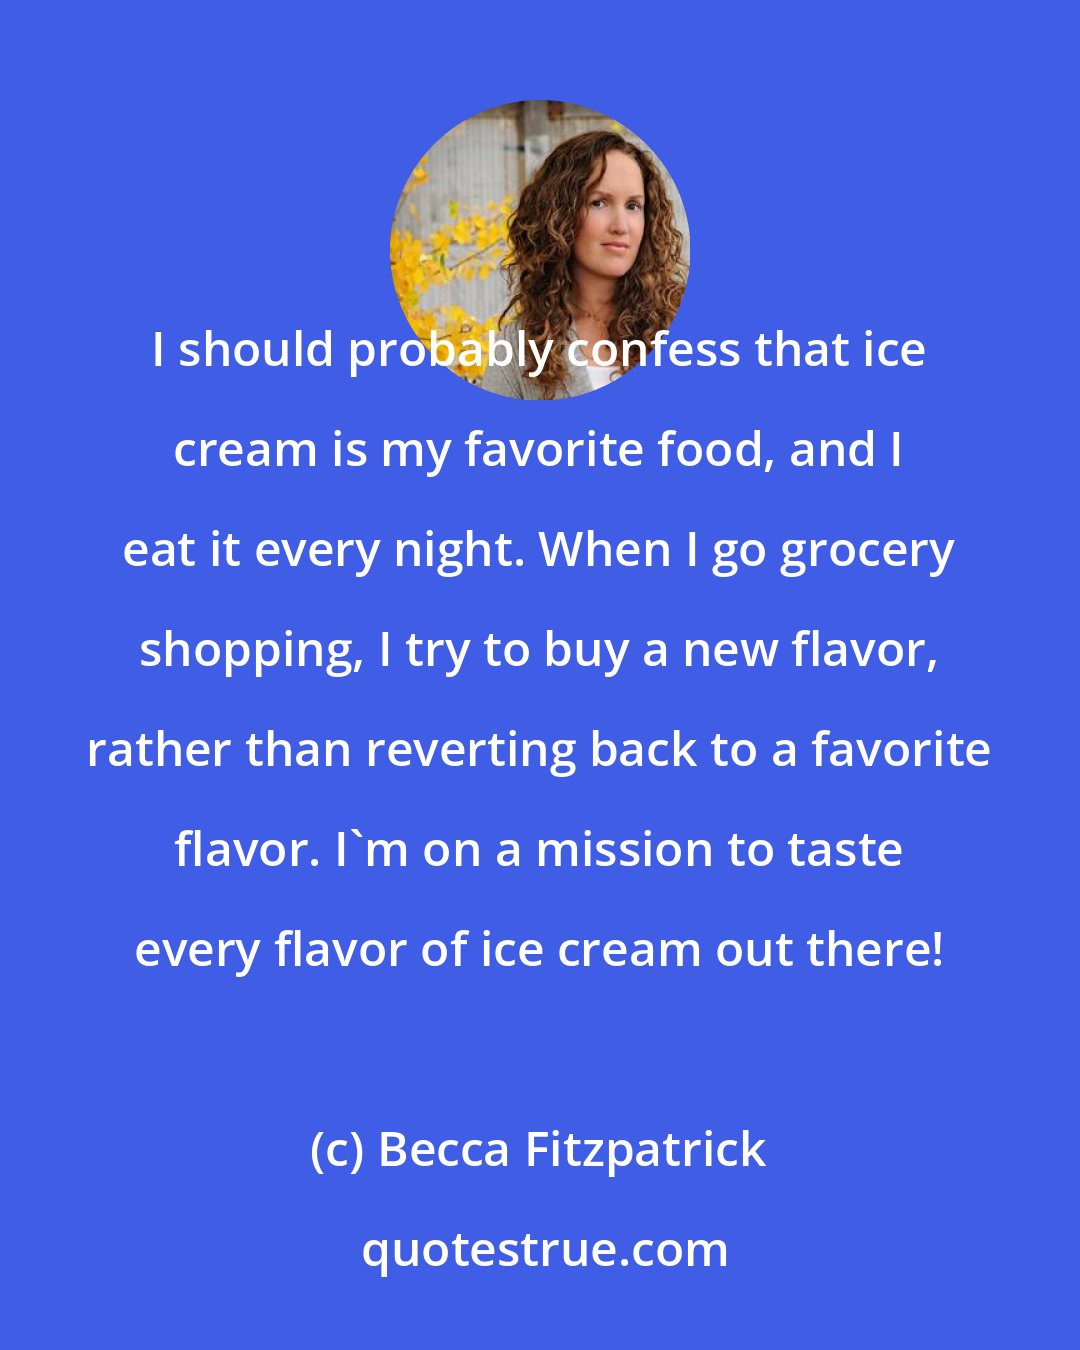 Becca Fitzpatrick: I should probably confess that ice cream is my favorite food, and I eat it every night. When I go grocery shopping, I try to buy a new flavor, rather than reverting back to a favorite flavor. I'm on a mission to taste every flavor of ice cream out there!